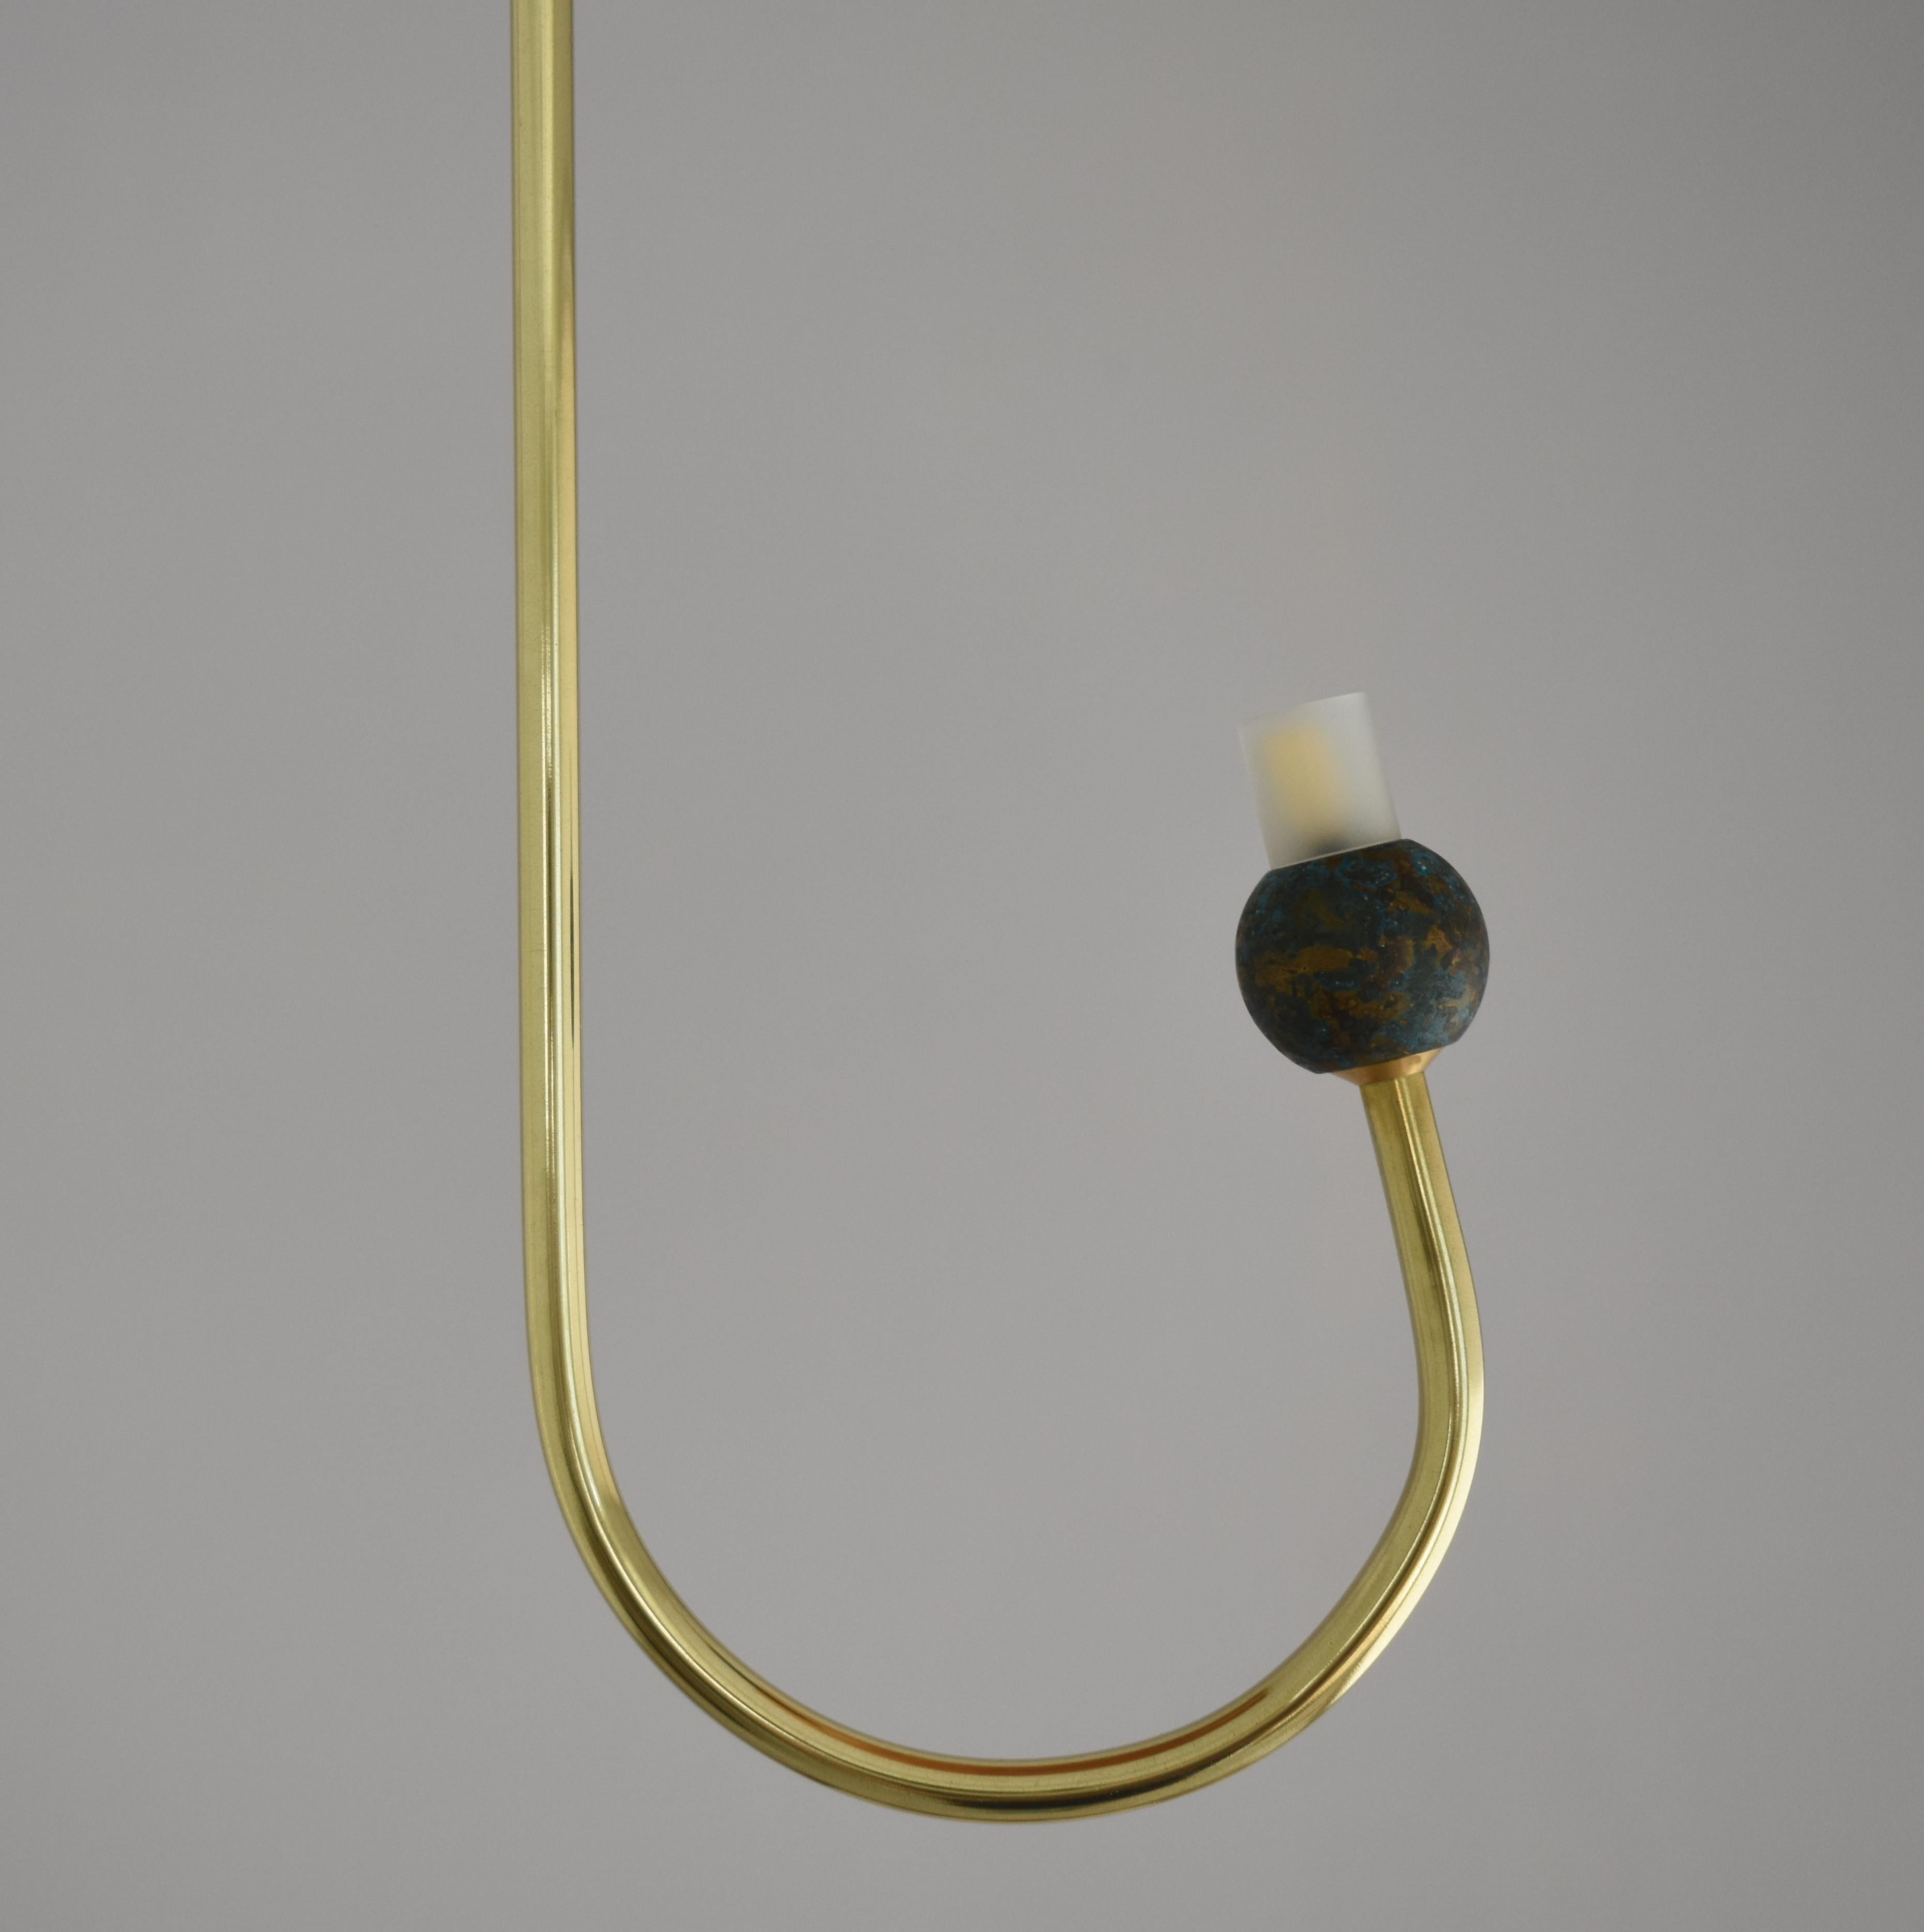 Greek Brass Sculpted Light Suspension, 'Let's Talk' by Periclis Frementitis For Sale